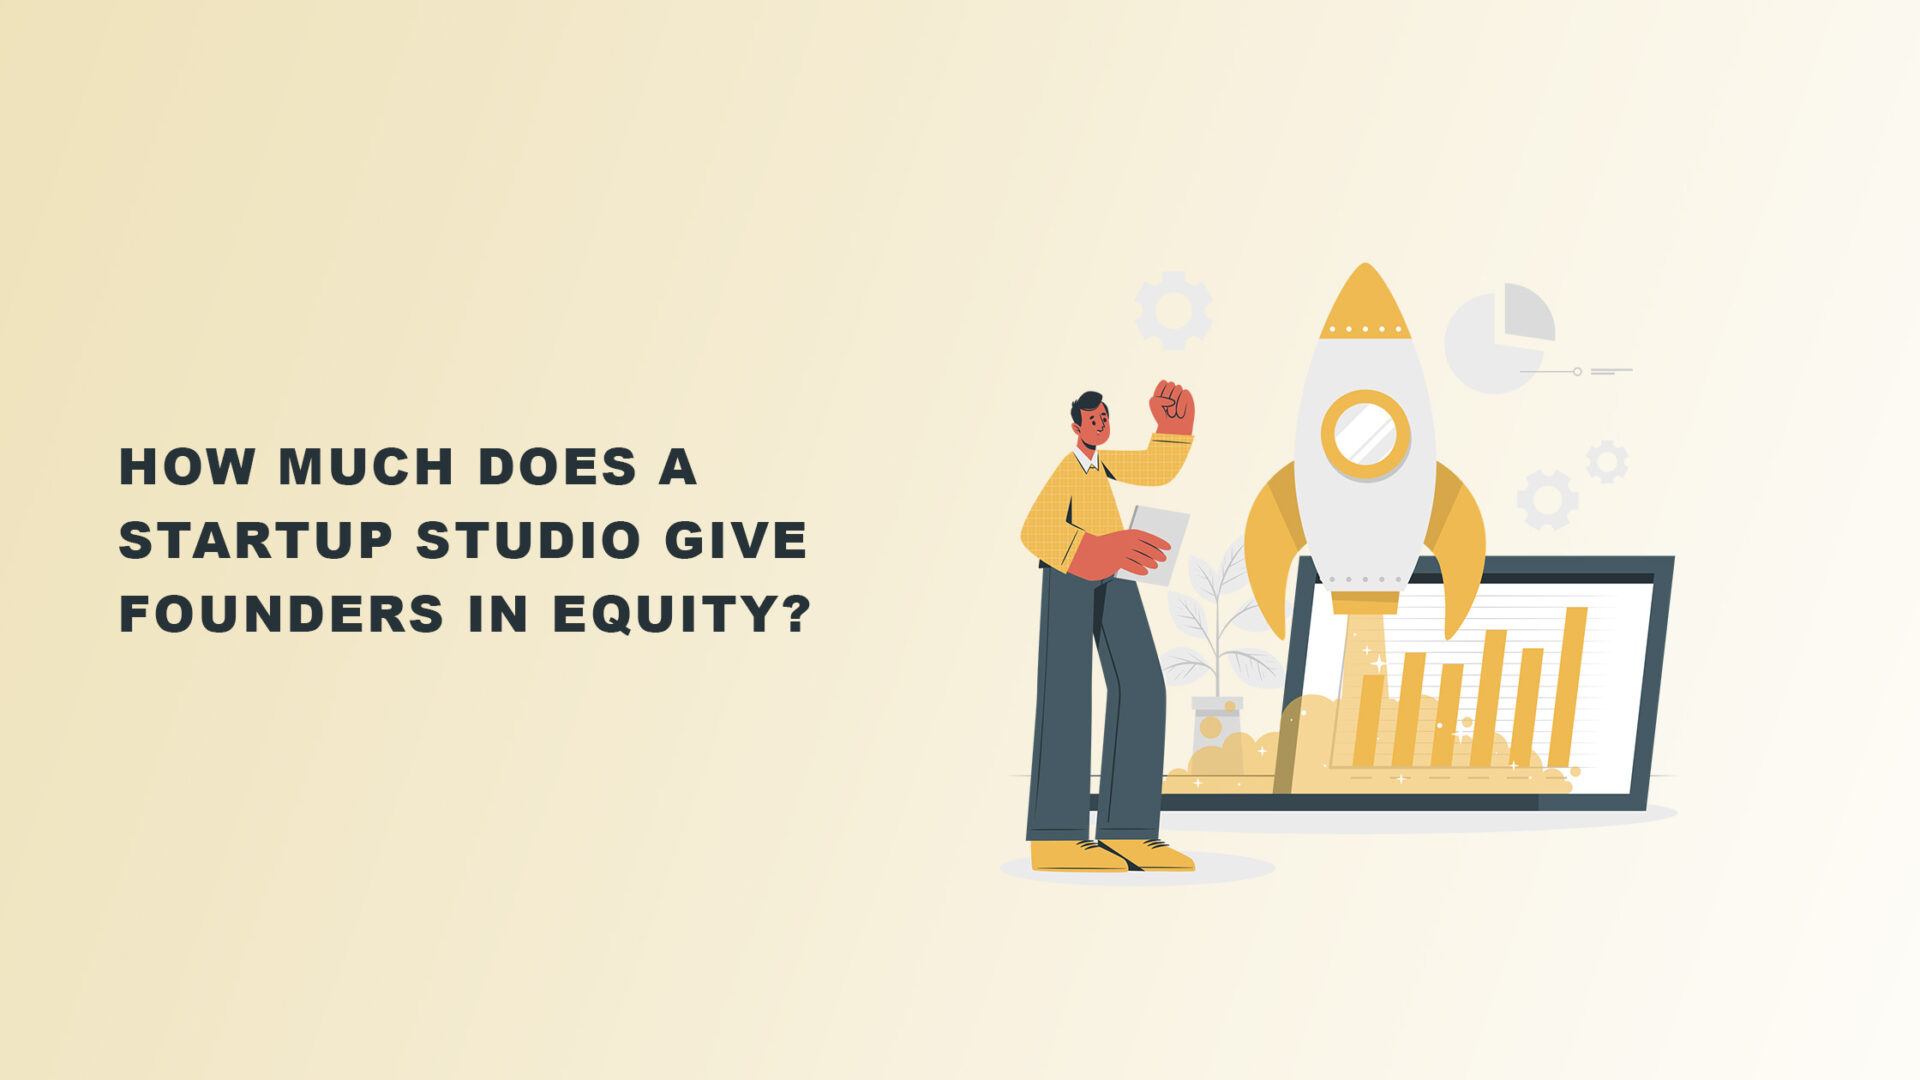 How Much Does A Startup Studio Give Founders in Equity